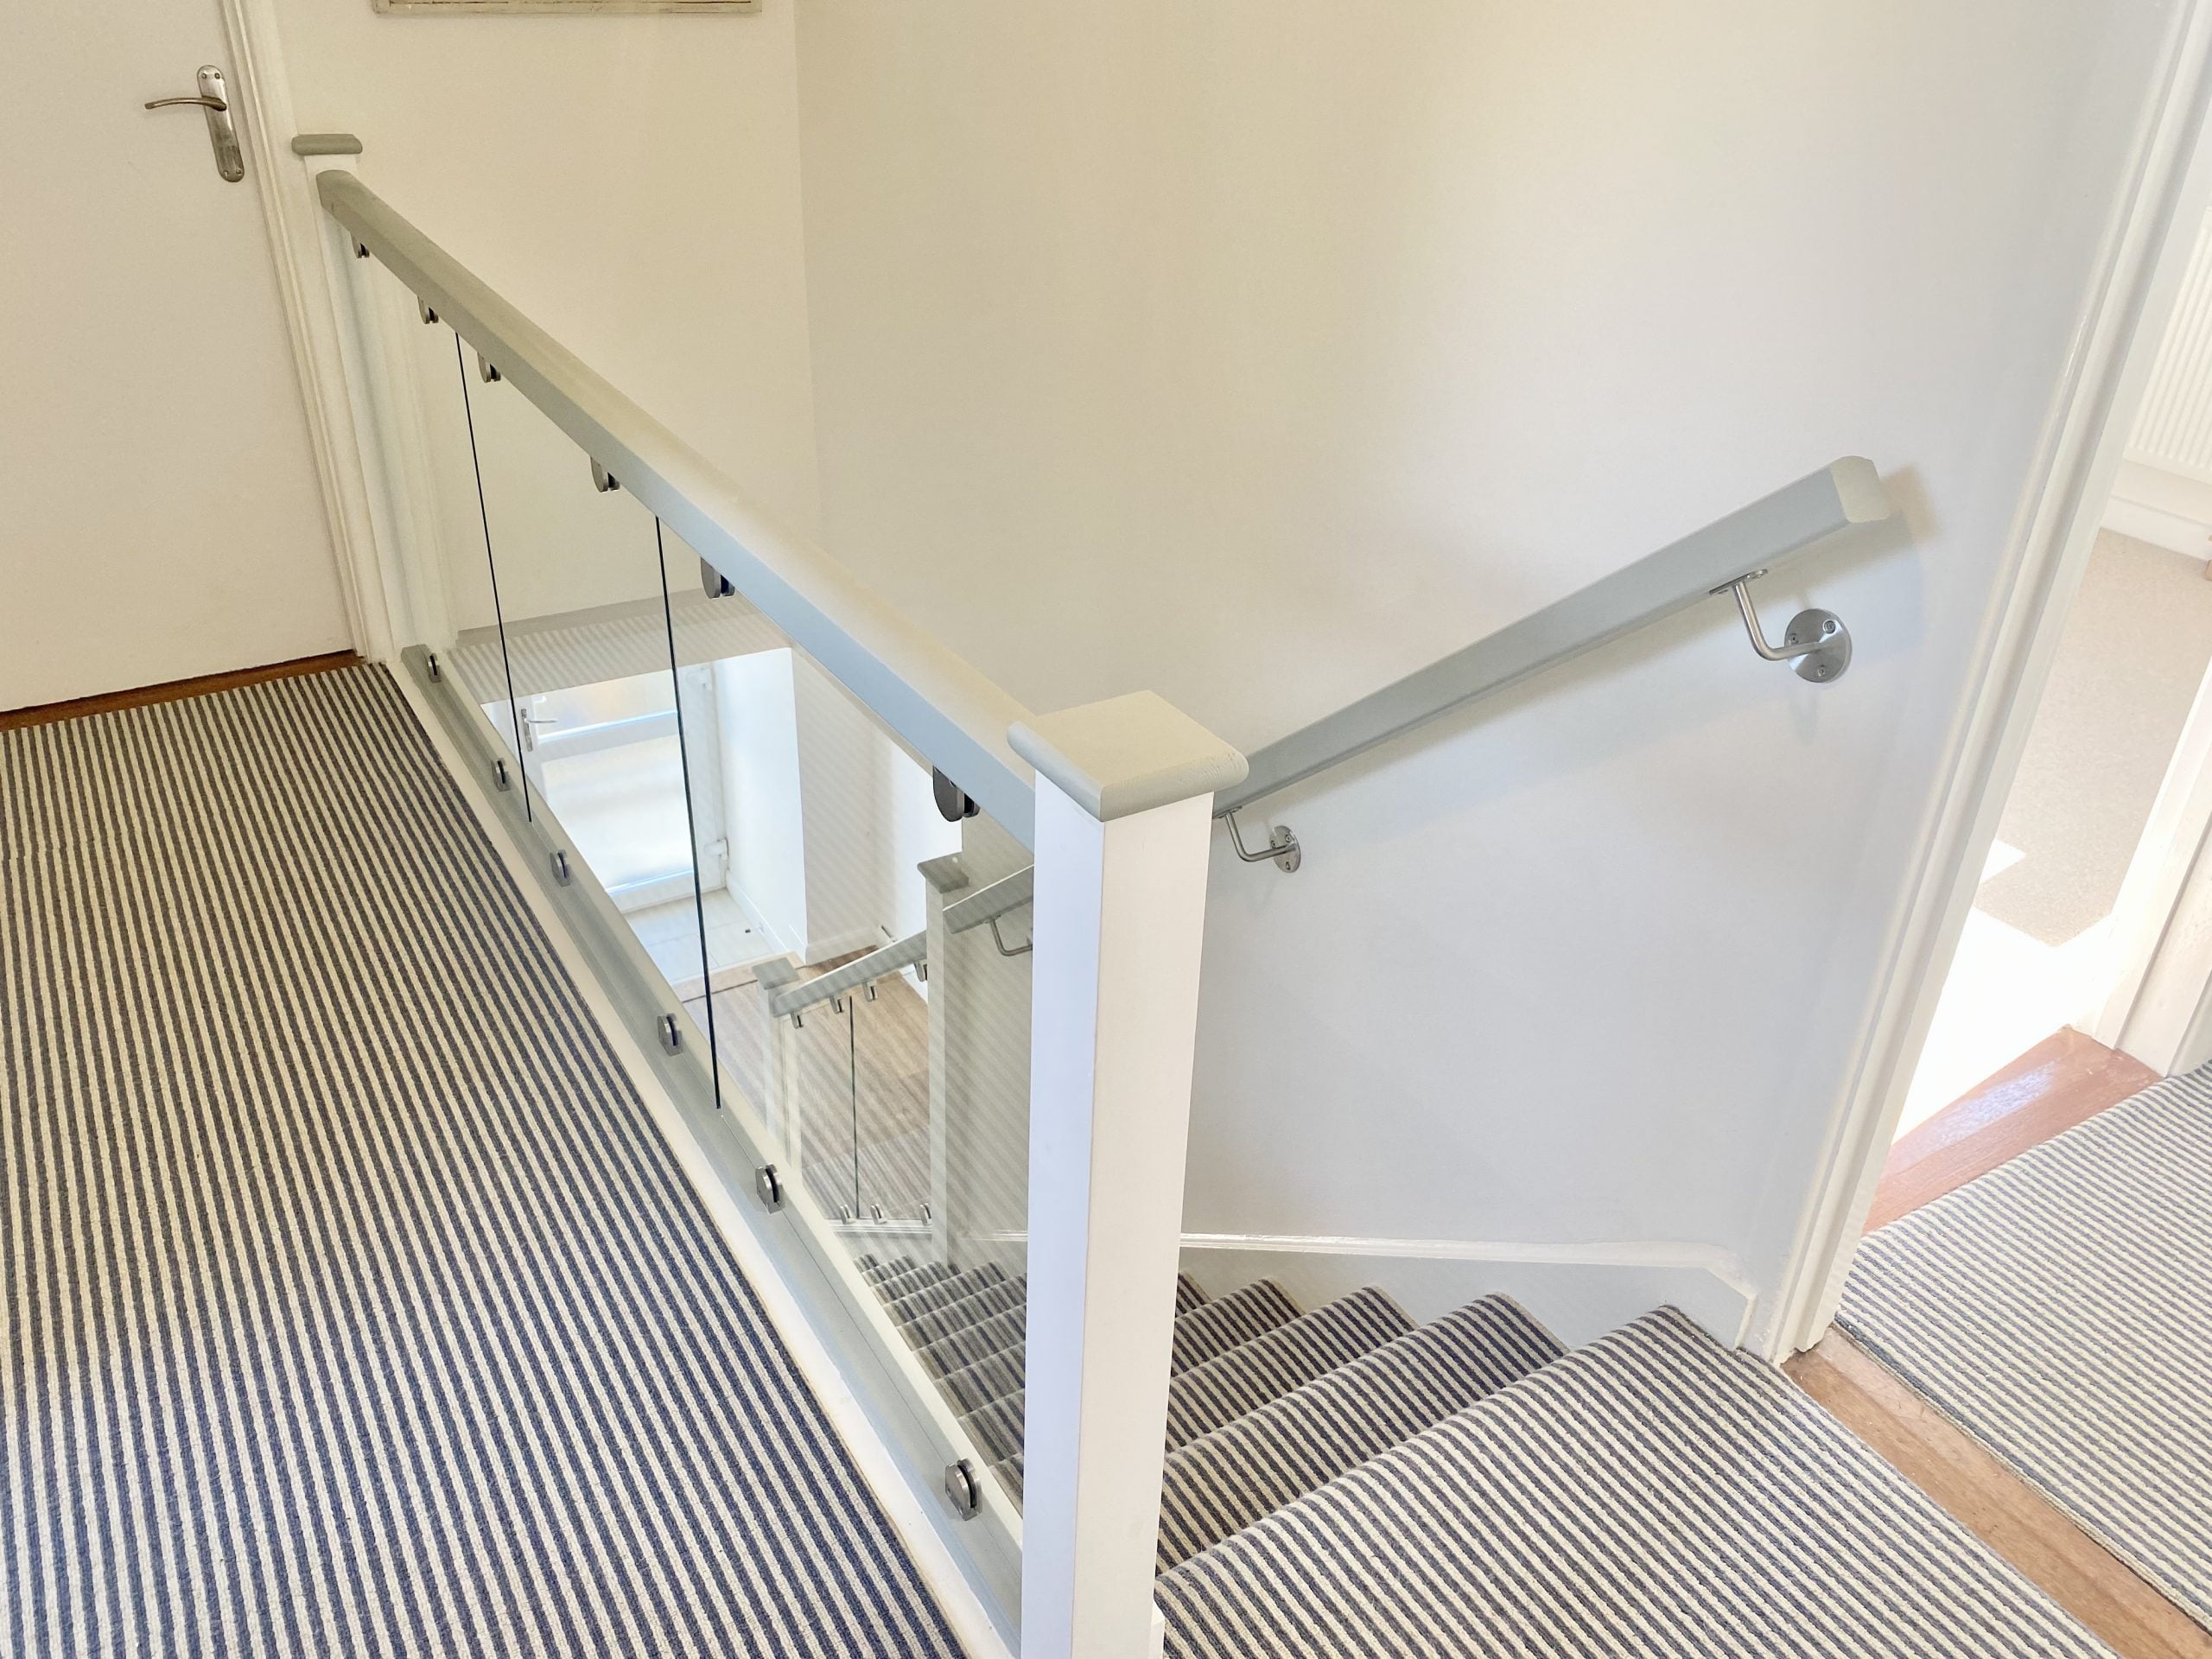 Grey Square Handrail Baserail And Clamped Glass Landing Balustrade Kit 05 Meters Stairfurb